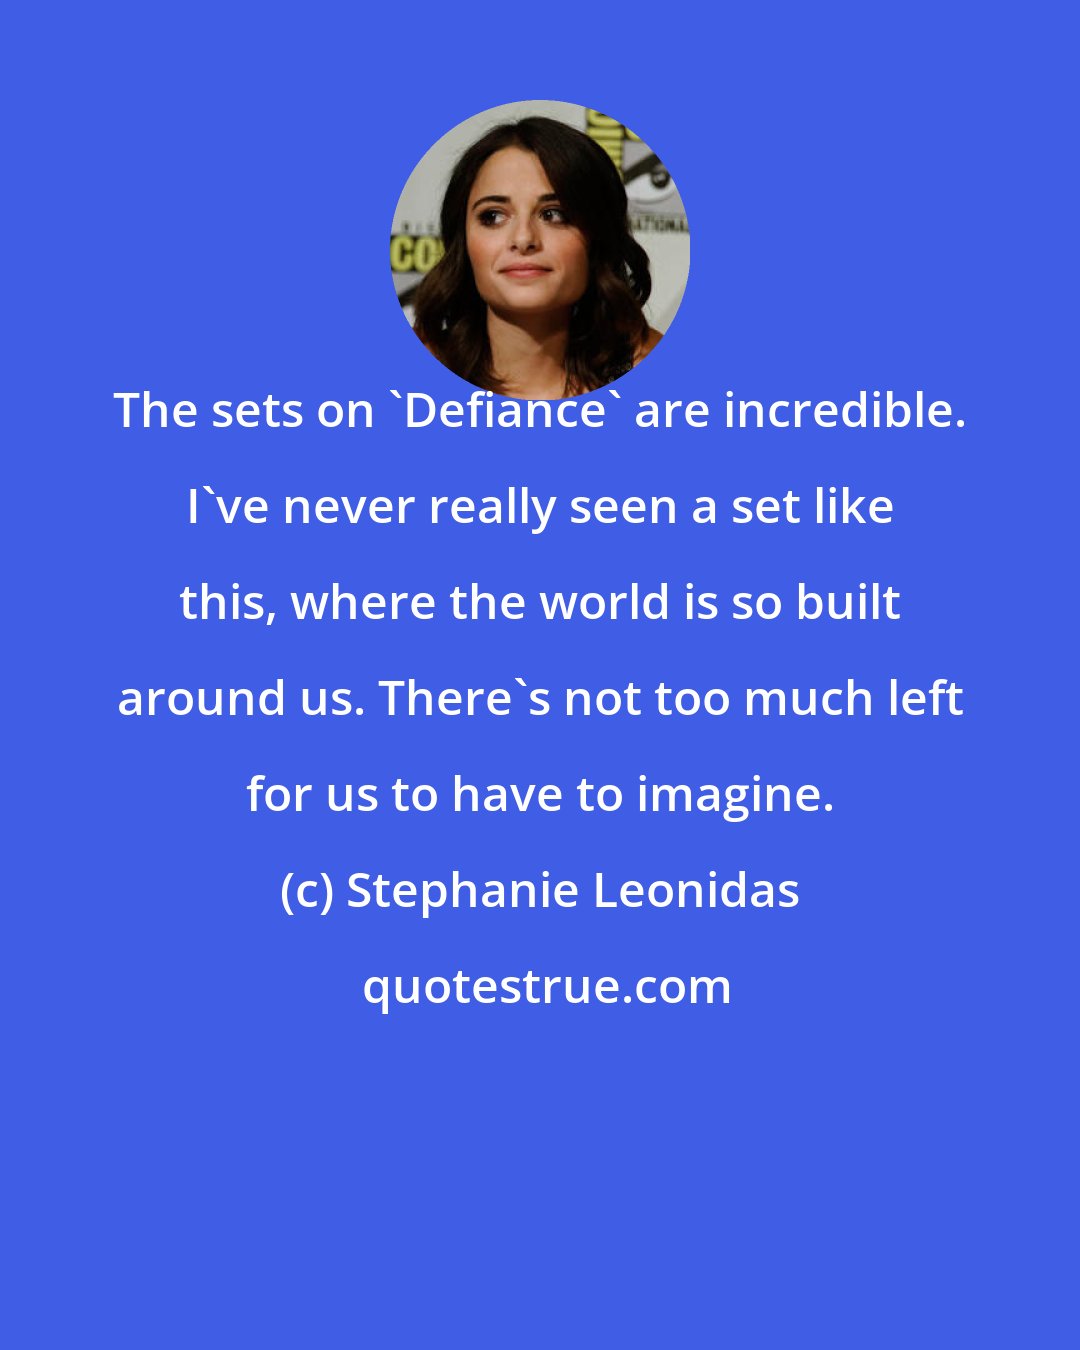 Stephanie Leonidas: The sets on 'Defiance' are incredible. I've never really seen a set like this, where the world is so built around us. There's not too much left for us to have to imagine.